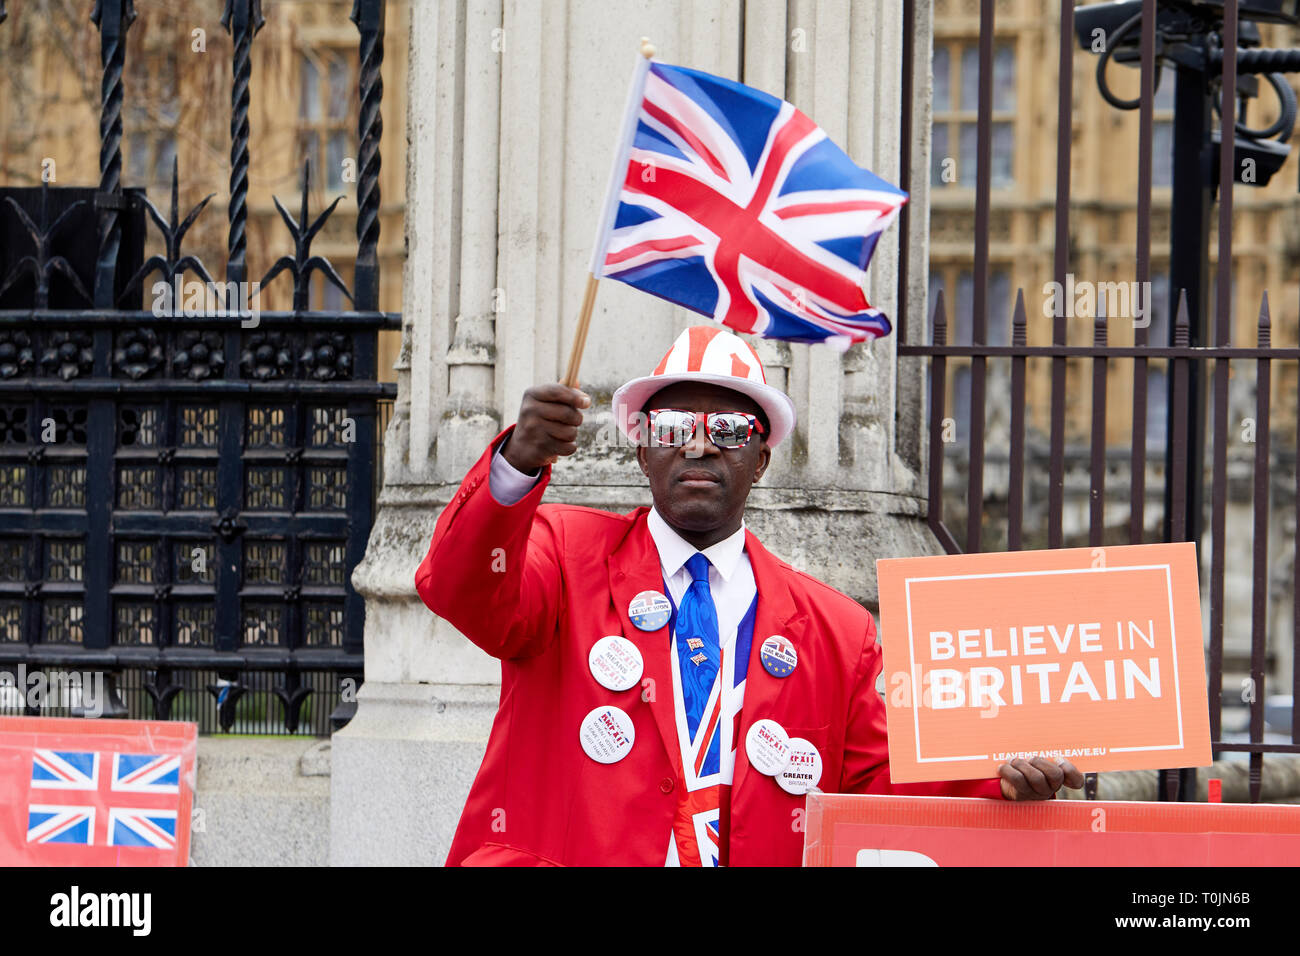 London, UK. - March 20, 2019: A Leave supporter campaigning outside Parliament. Credit: Kevin J. Frost/Alamy Live News Stock Photo